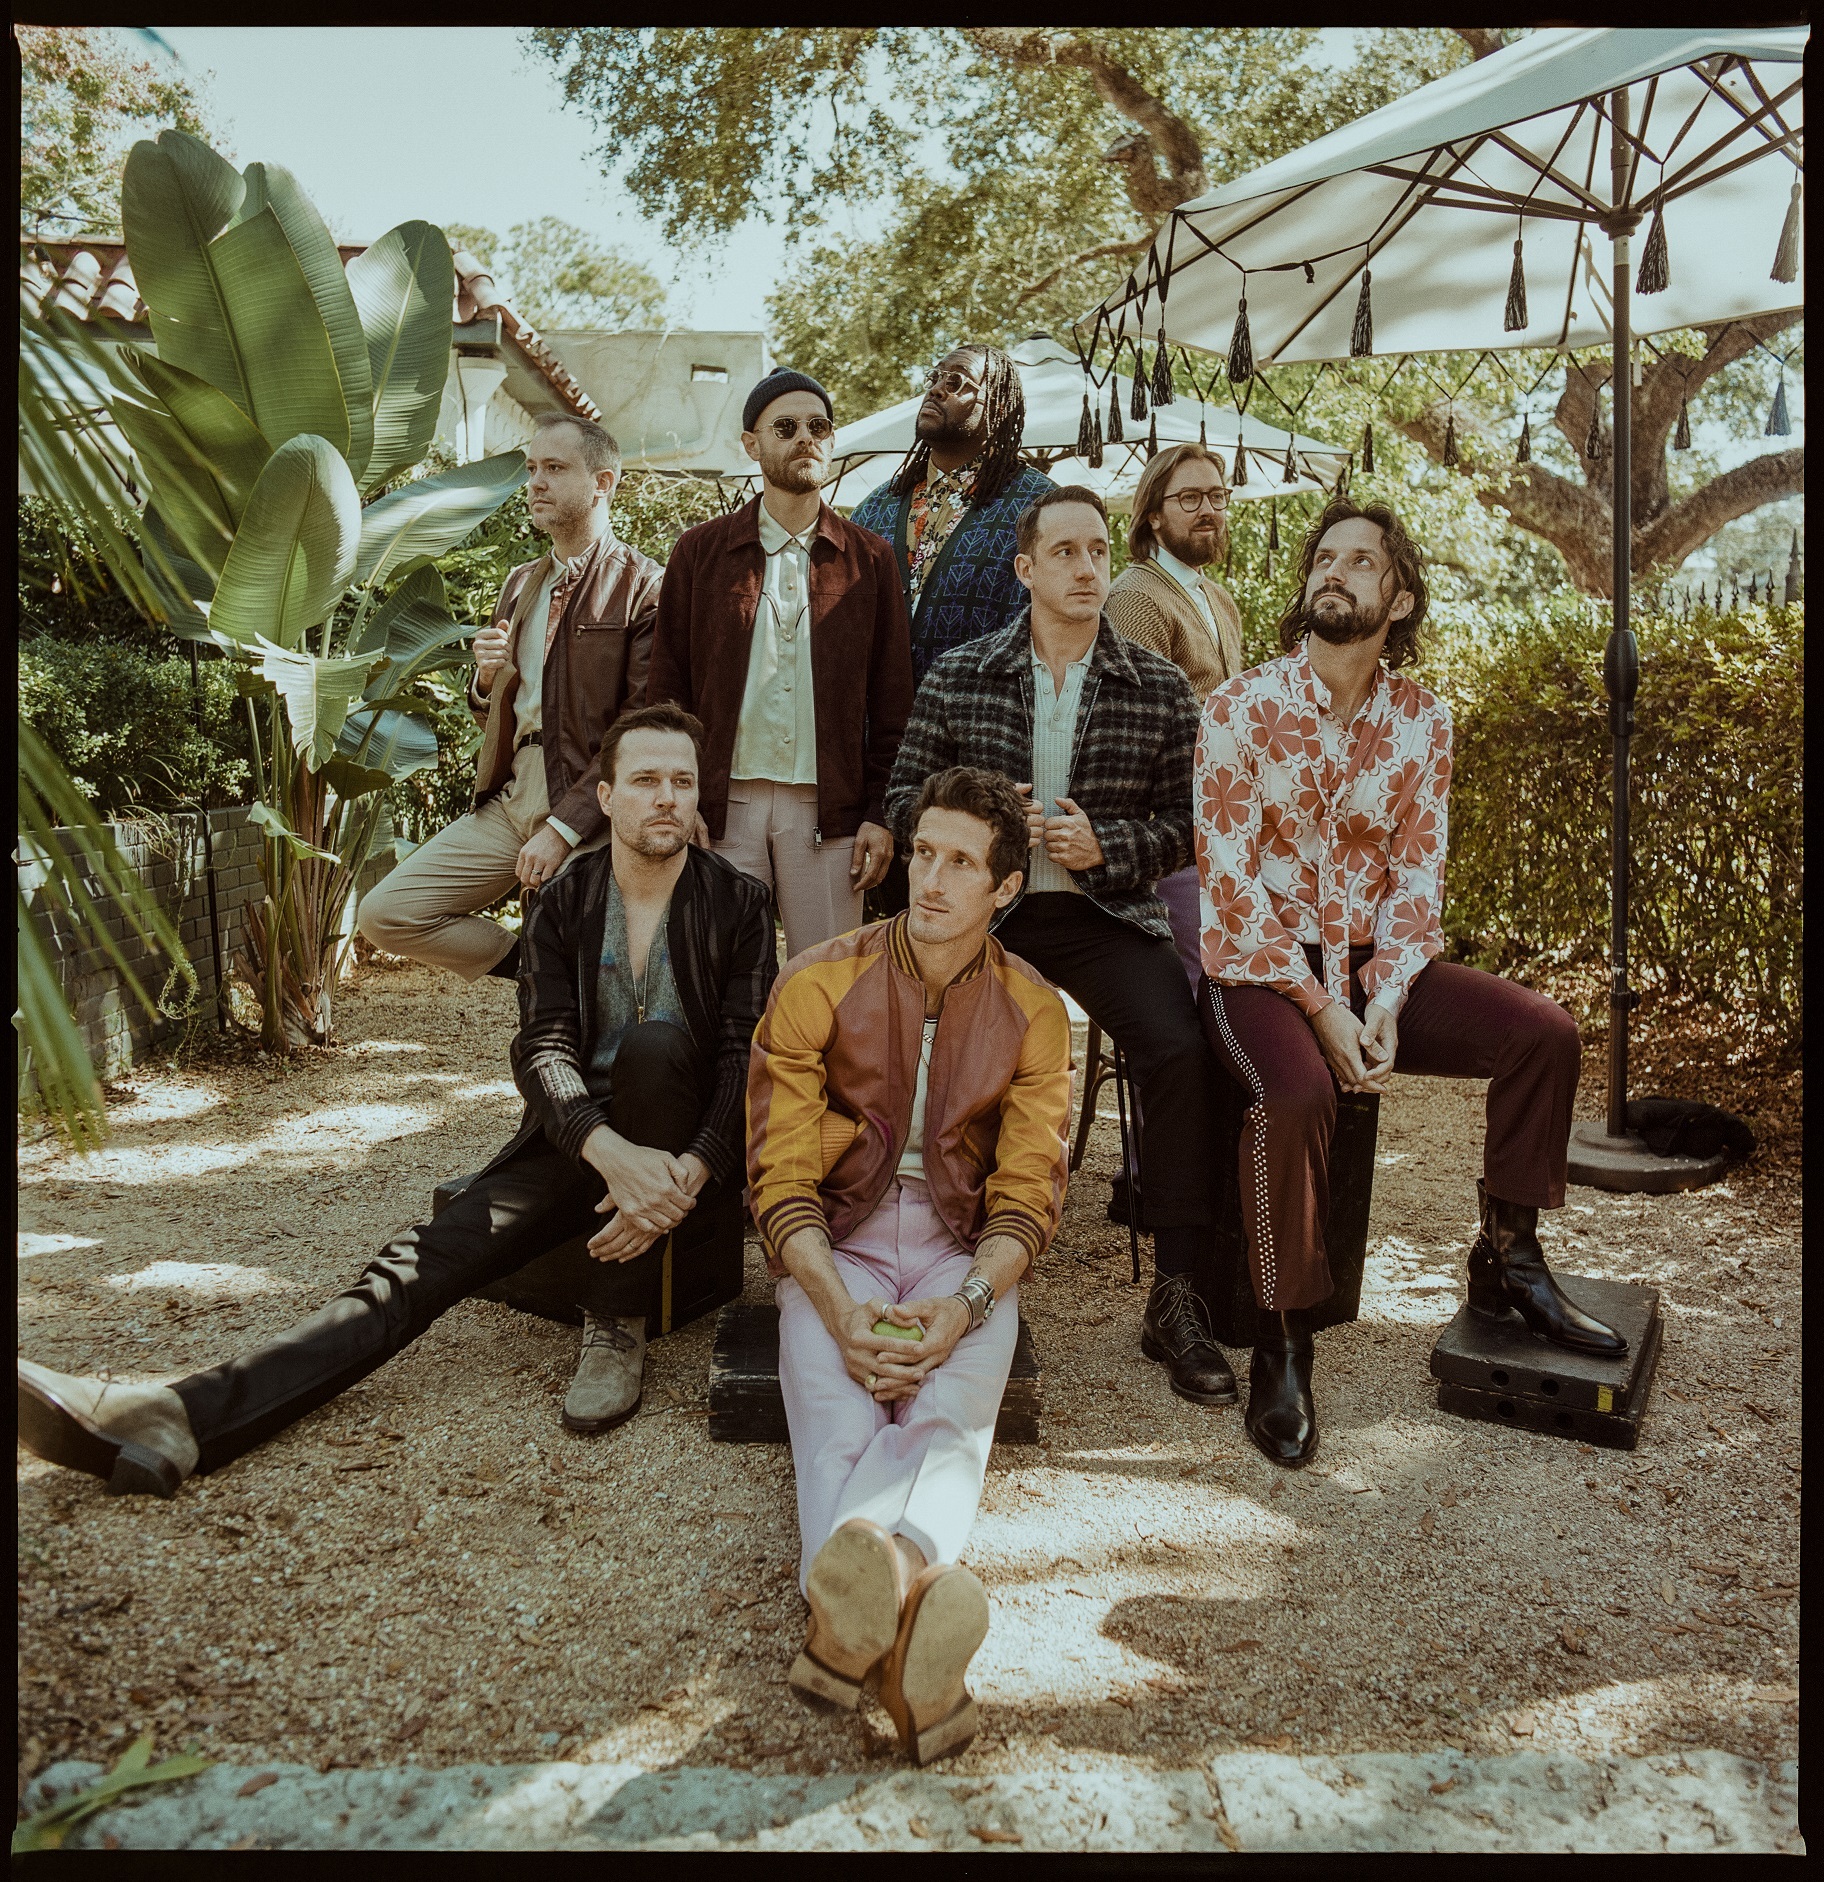 The Revivalists Are Living For The Spirit With New “Kid” Single & Music Video Out Now